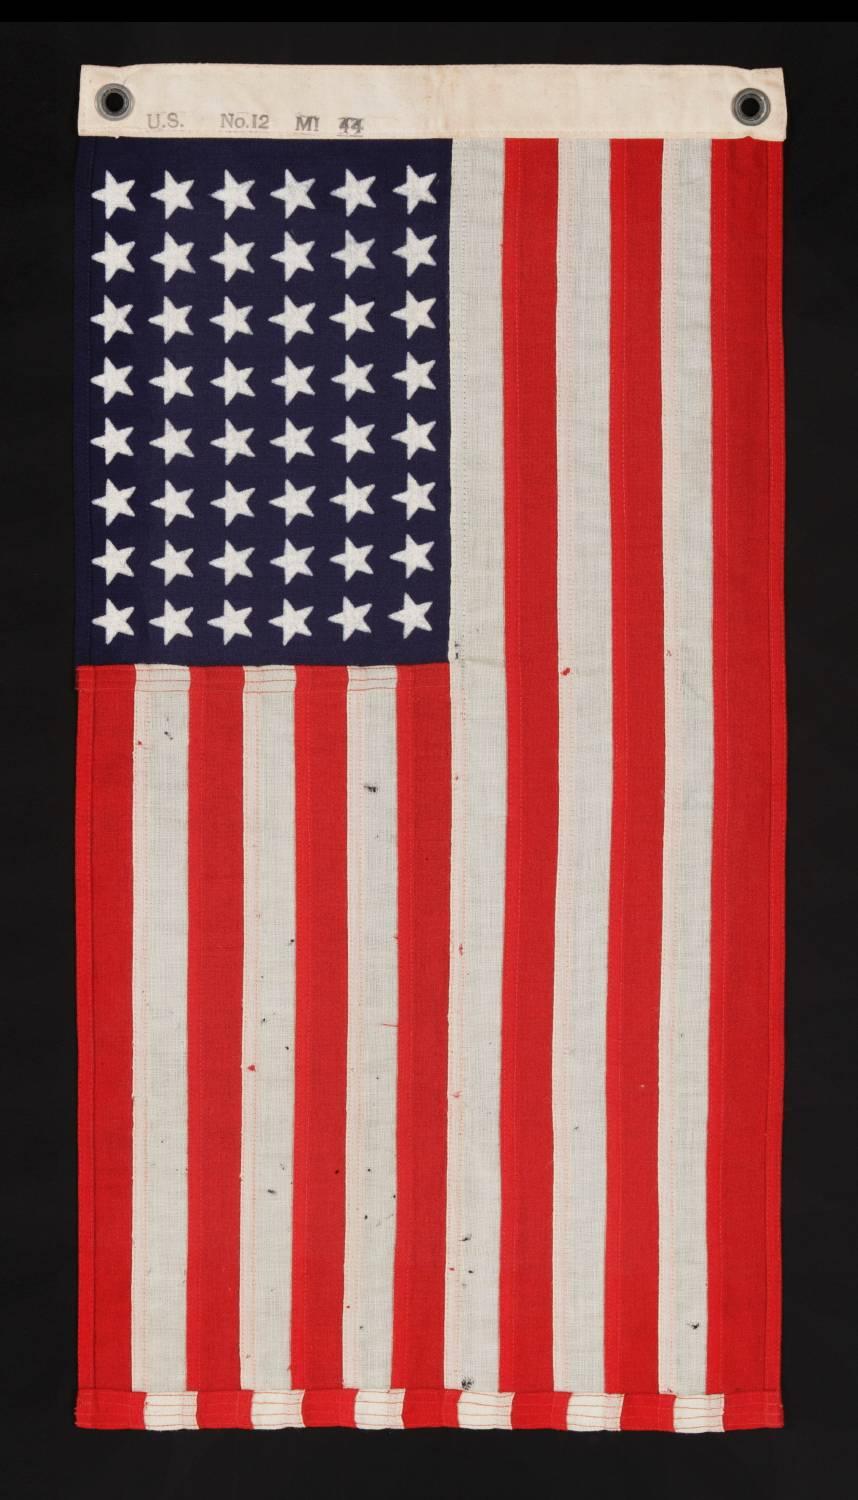 48 star, U.S. Navy small boat ensign, made at Mare Island, California during WWII, signed and dated 1944, in the smallest scale employed at the time. 

48 star American national flag, made during World War II (U.S. involvement 1941-1945) and